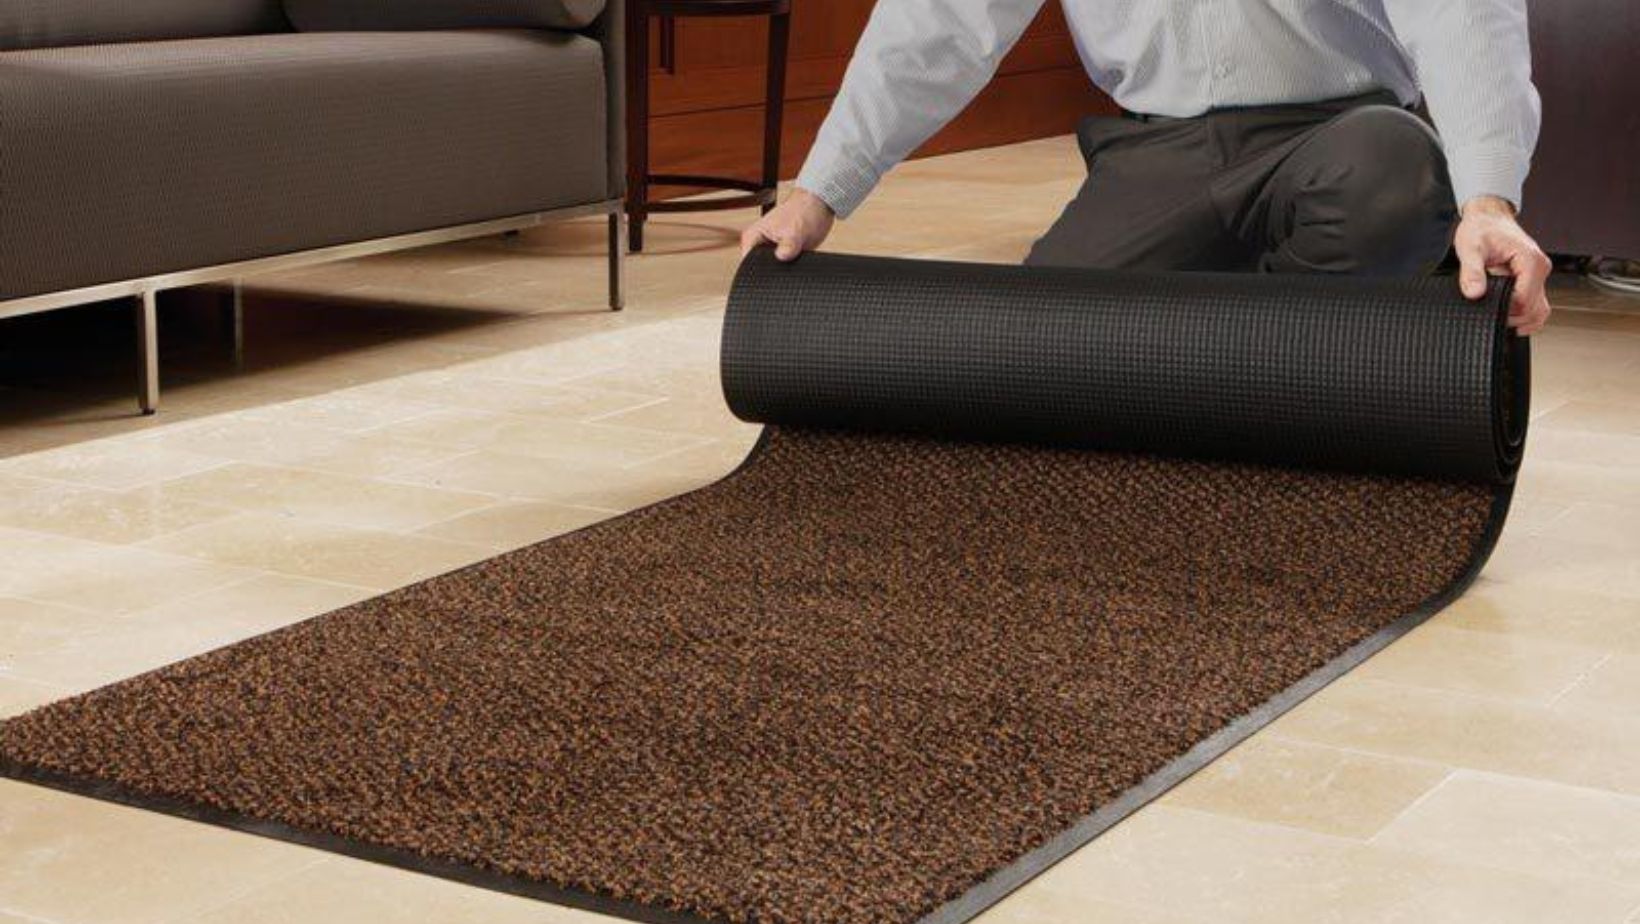 https://www.waggs.ca/wp-content/uploads/2022/10/6-Reasons-Why-Renting-Floor-Mats-is-Better-Than-Buying-Them.jpg